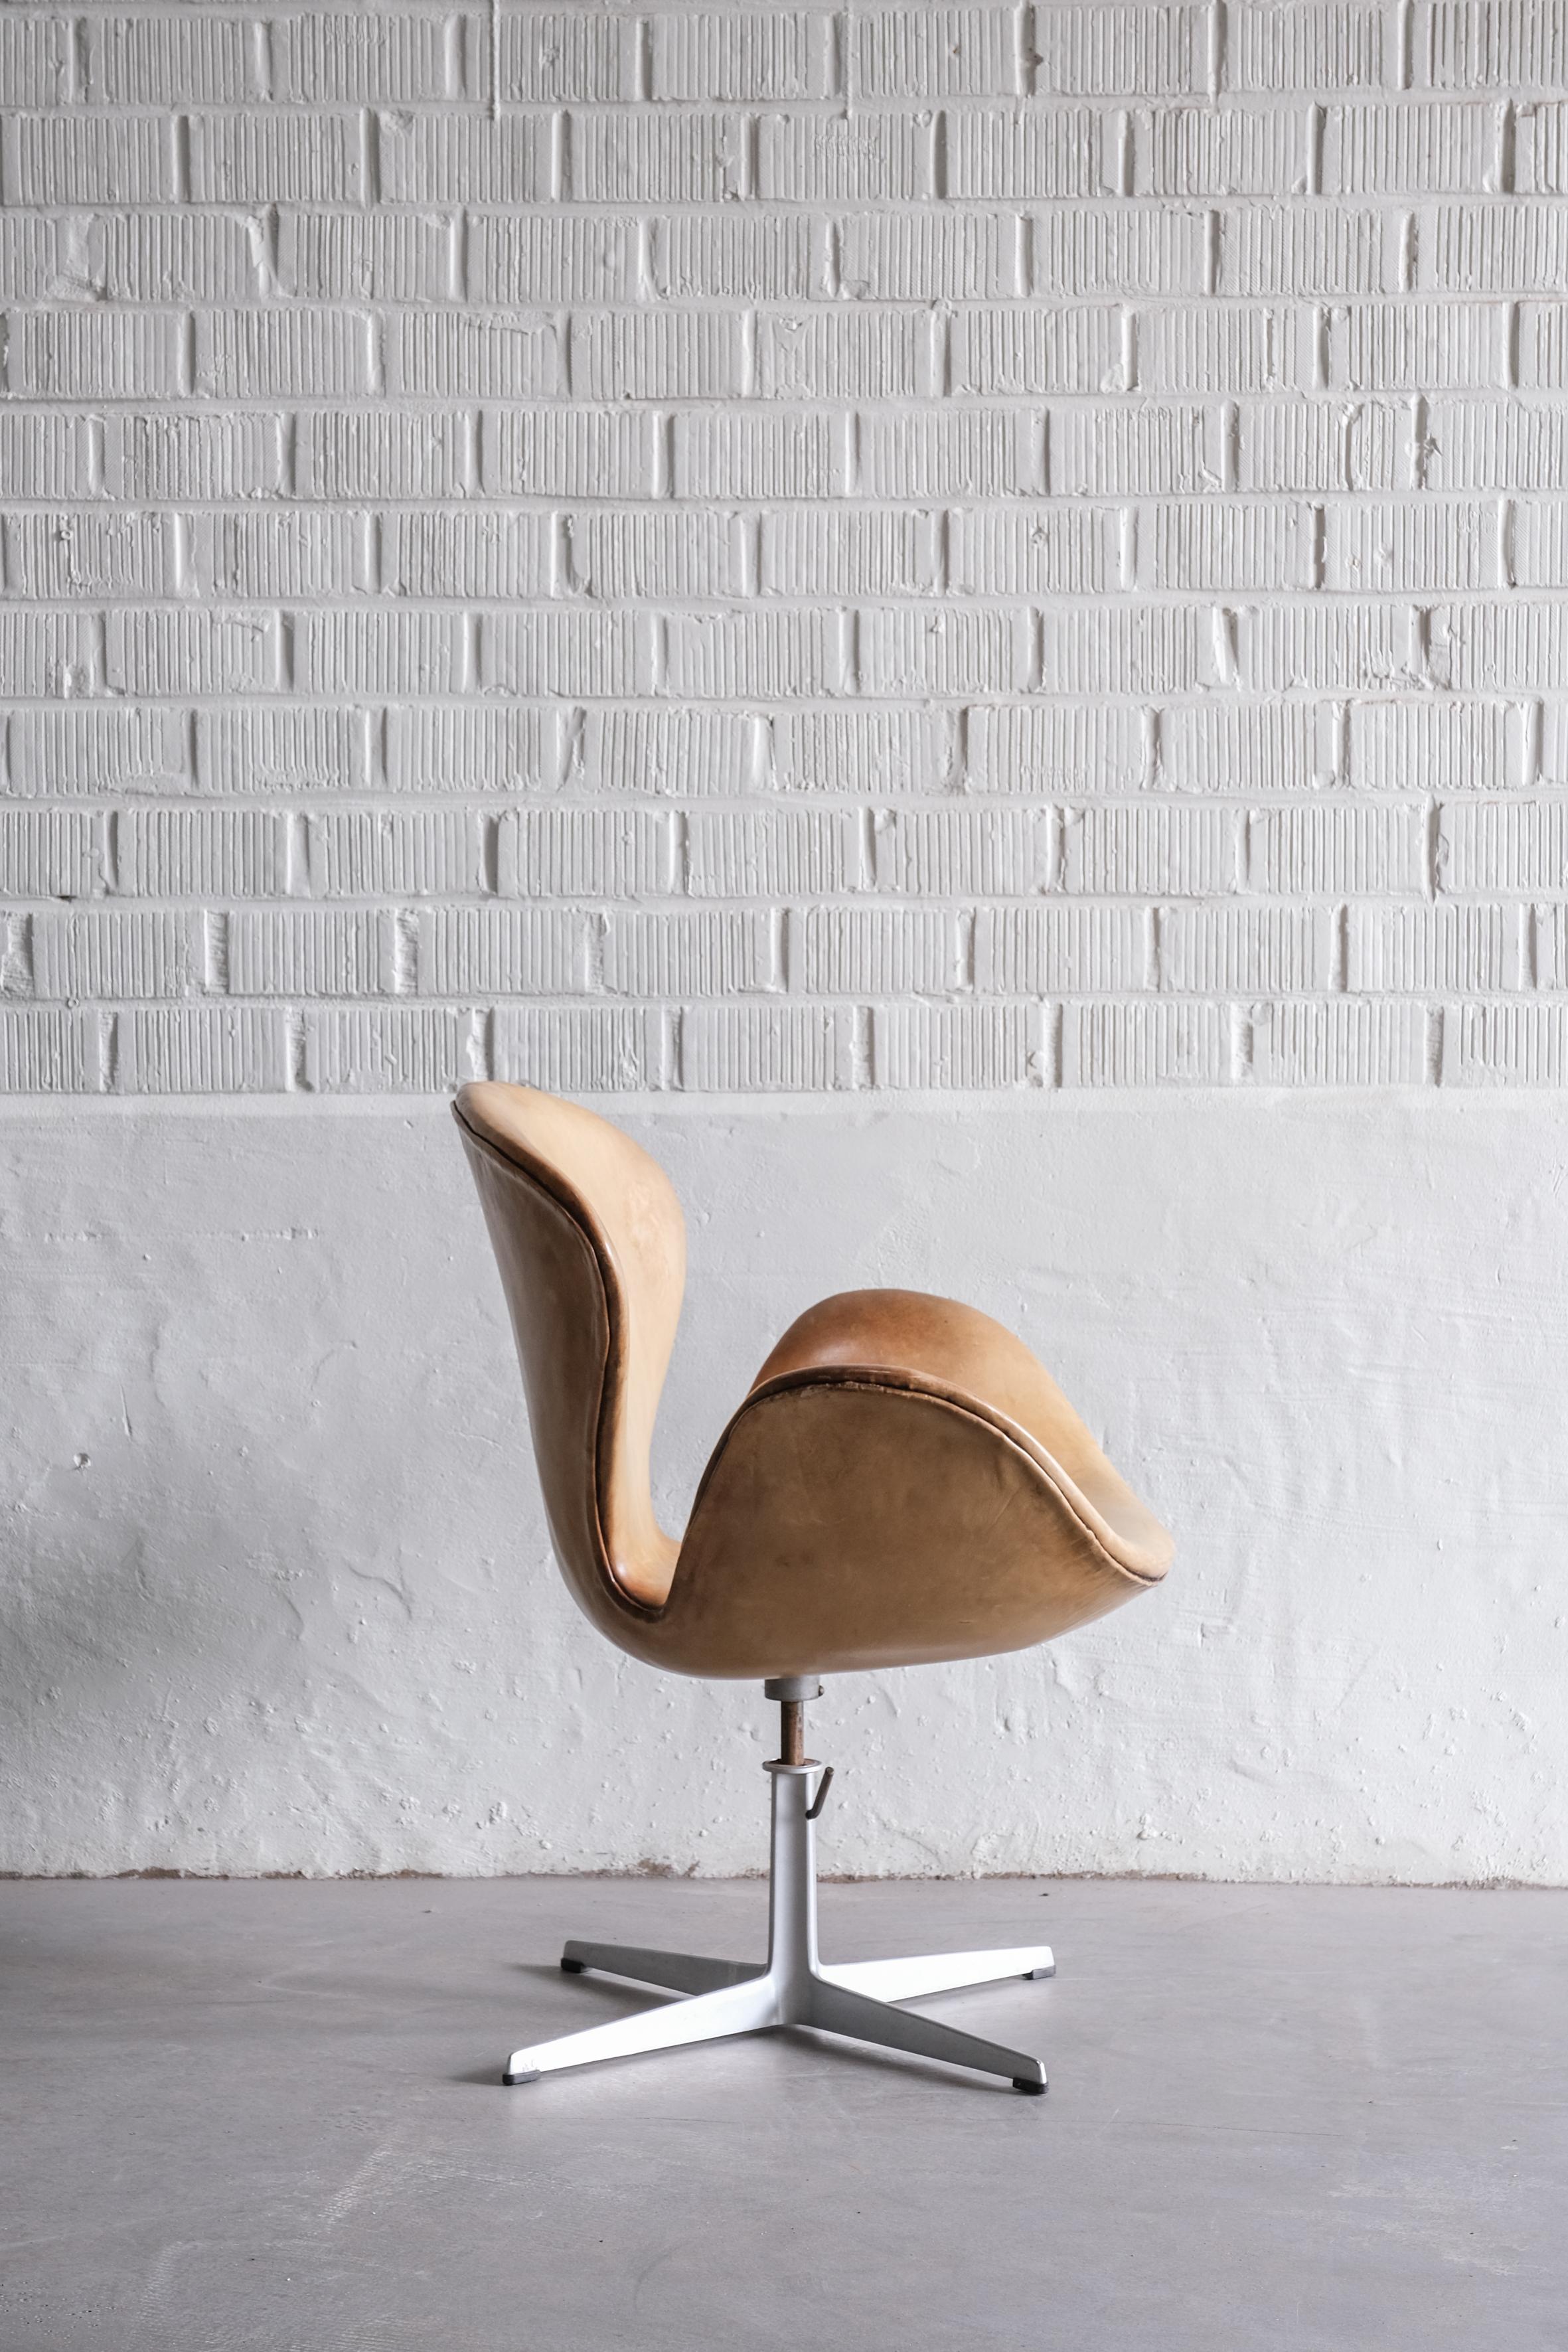 Danish Swan Chair by Arne Jacobsen 1971 with original leather and steel adjustable base